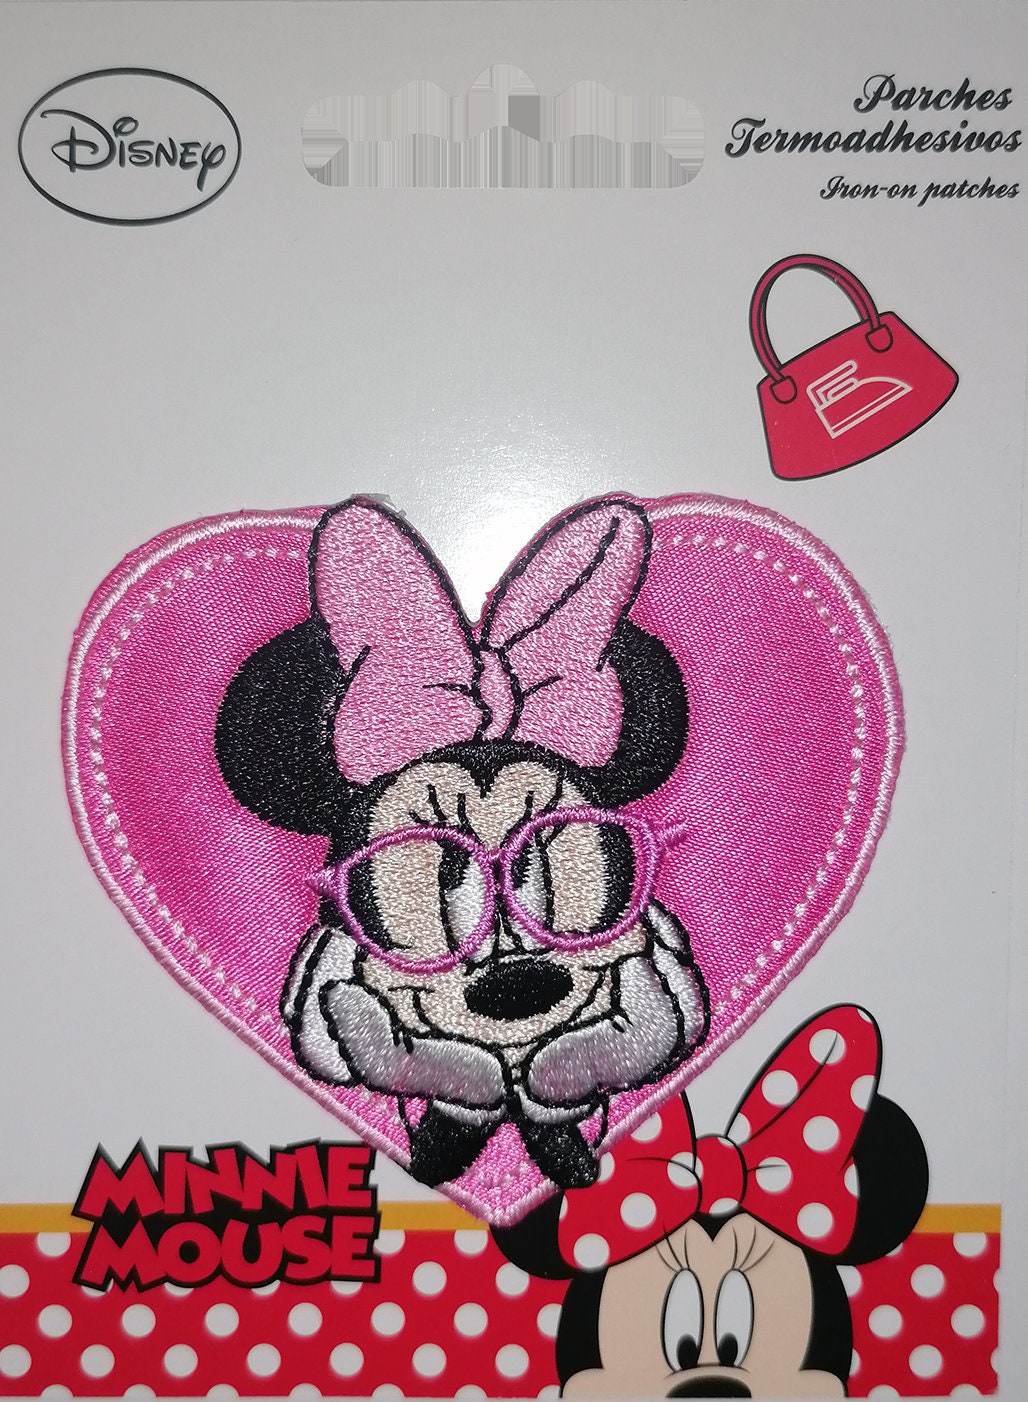 Disney Mickey Minnie Mouse Iron on Patch Iron on Vinyl for Clothes Parches  Termoadhesivos Para Ropa